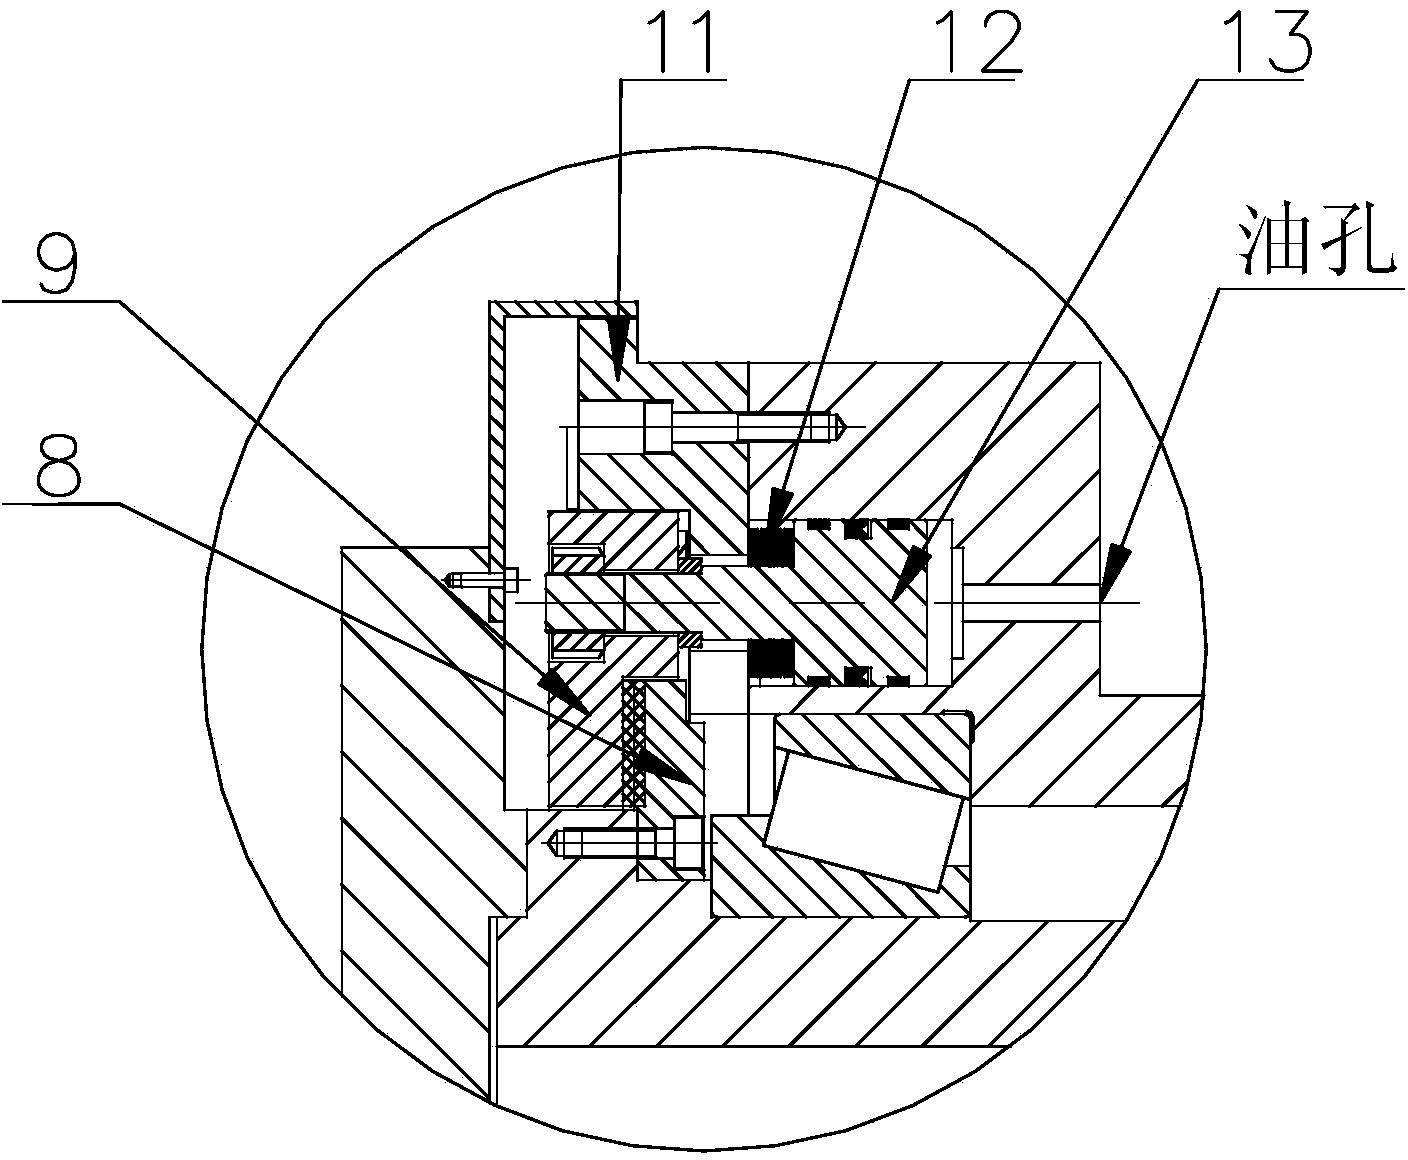 Axial locking mechanism of machine tool spindle